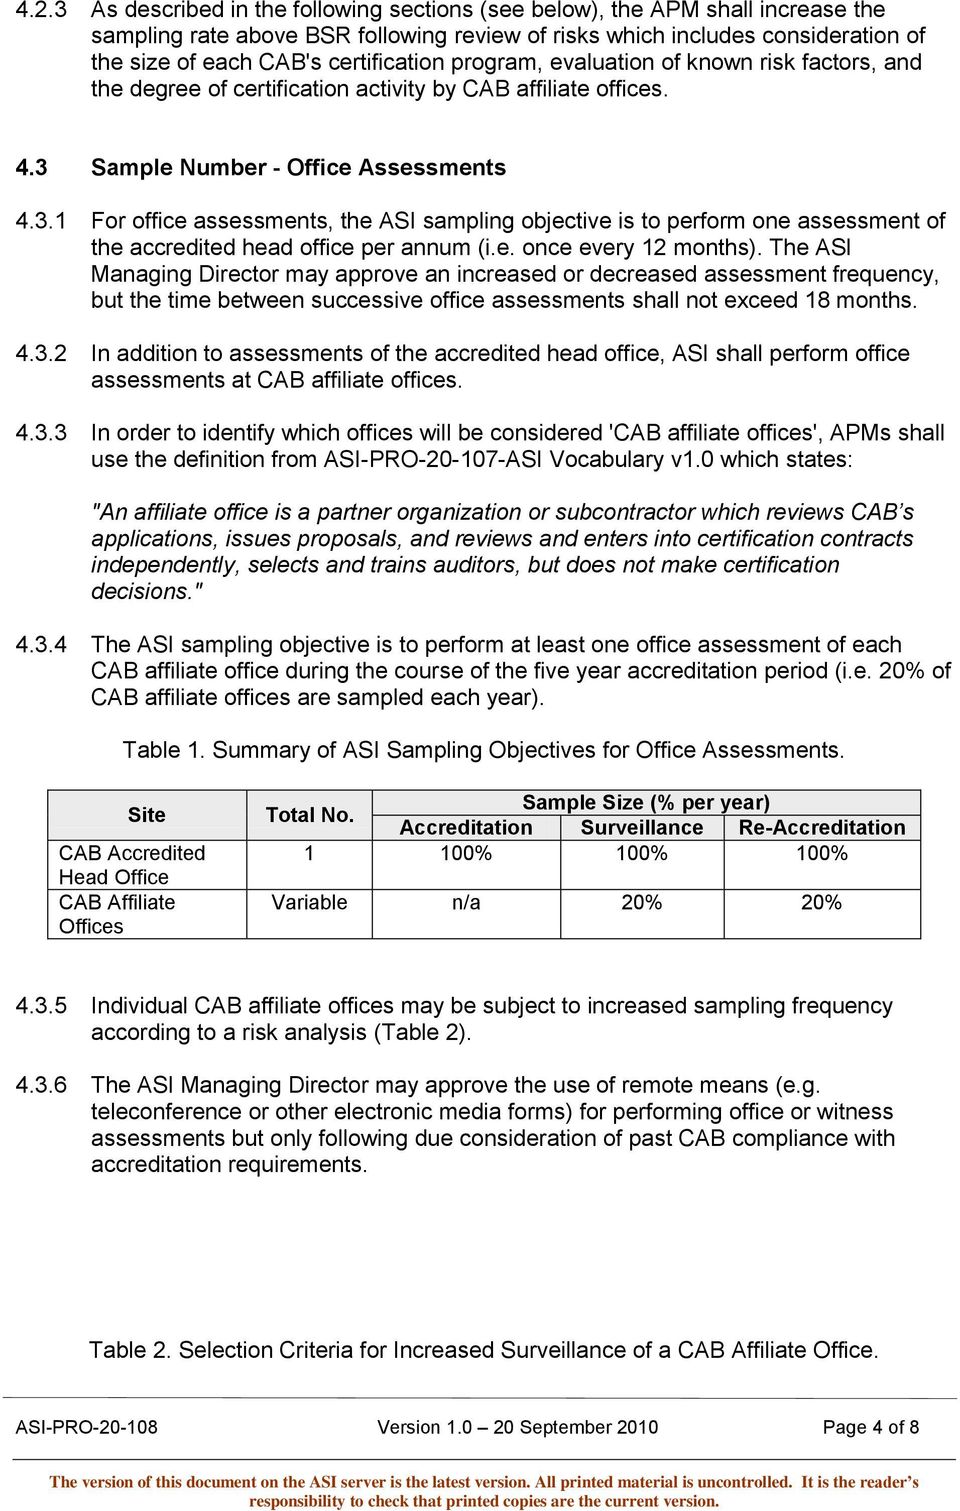 Sample Number - Office Assessments 4.3.1 For office assessments, the ASI sampling objective is to perform one assessment of the accredited head office per annum (i.e. once every 12 months).